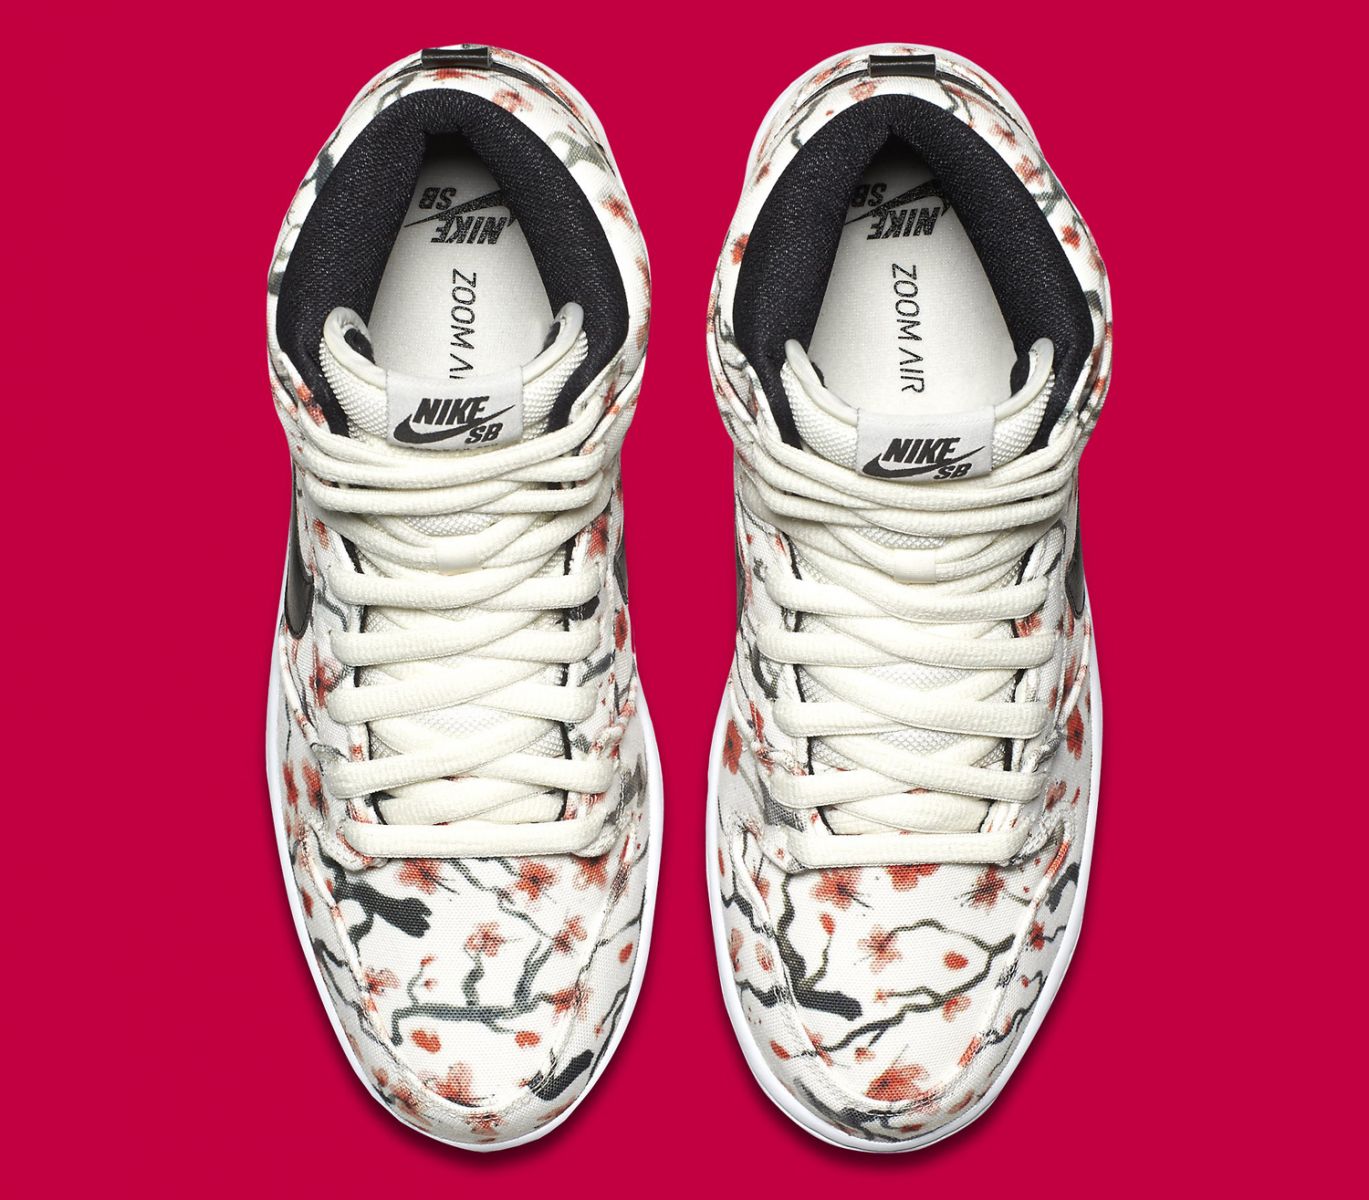 Cherry Blossoms Bloom on Nike SB Dunks | Sole Collector